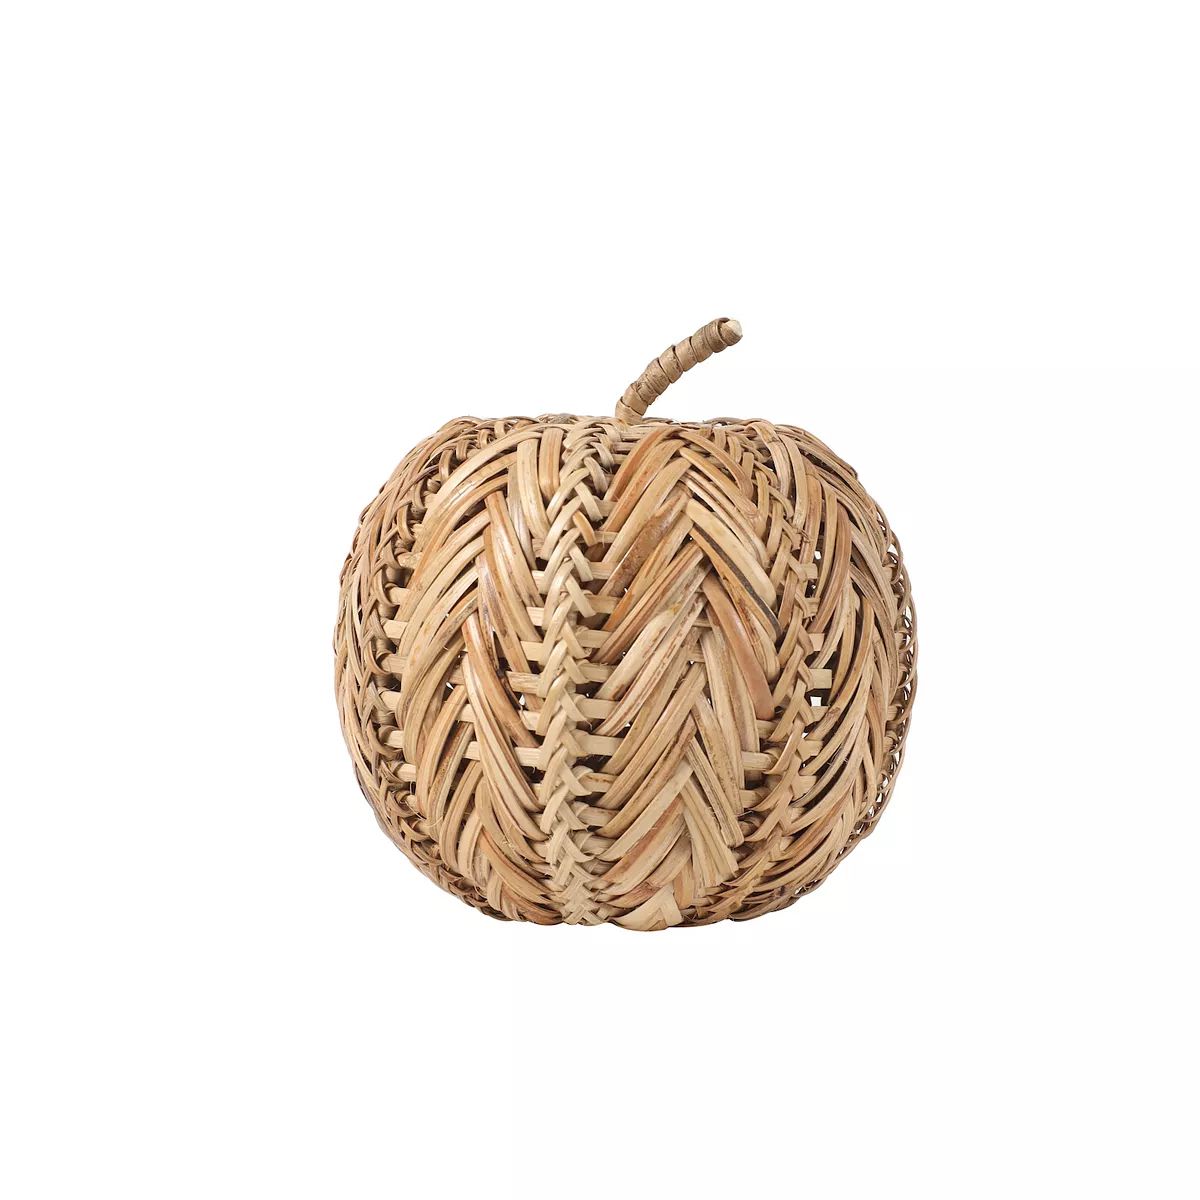 Celebrate Together™ Fall Small Woven Pumpkin Table Decor | Kohl's